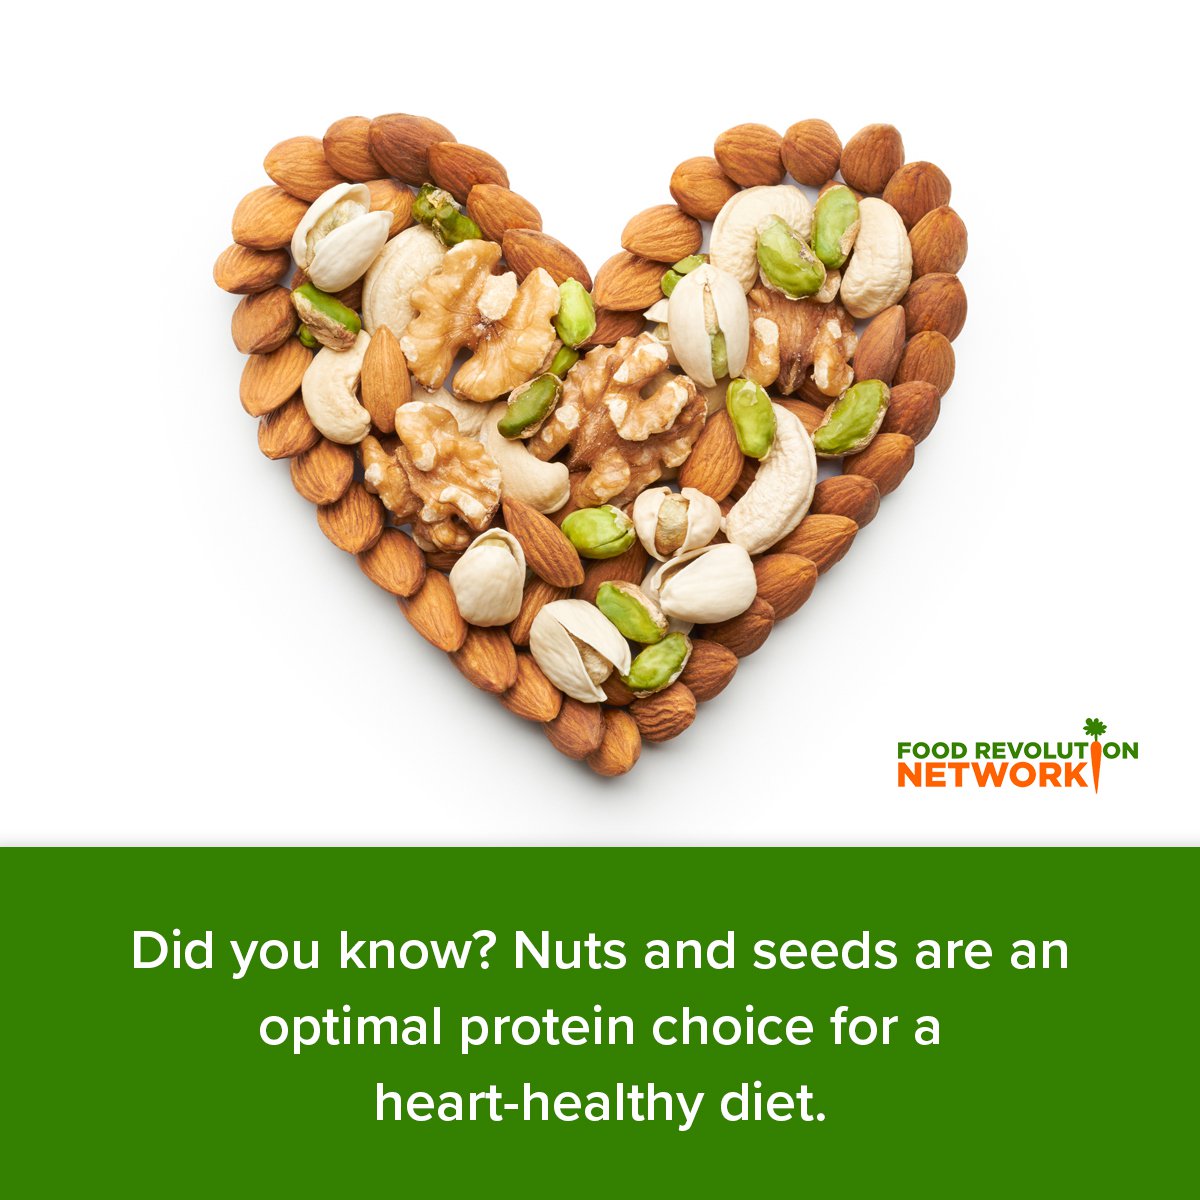 Did you know? Nuts and seeds are an optimal protein choice for a heart-healthy diet.